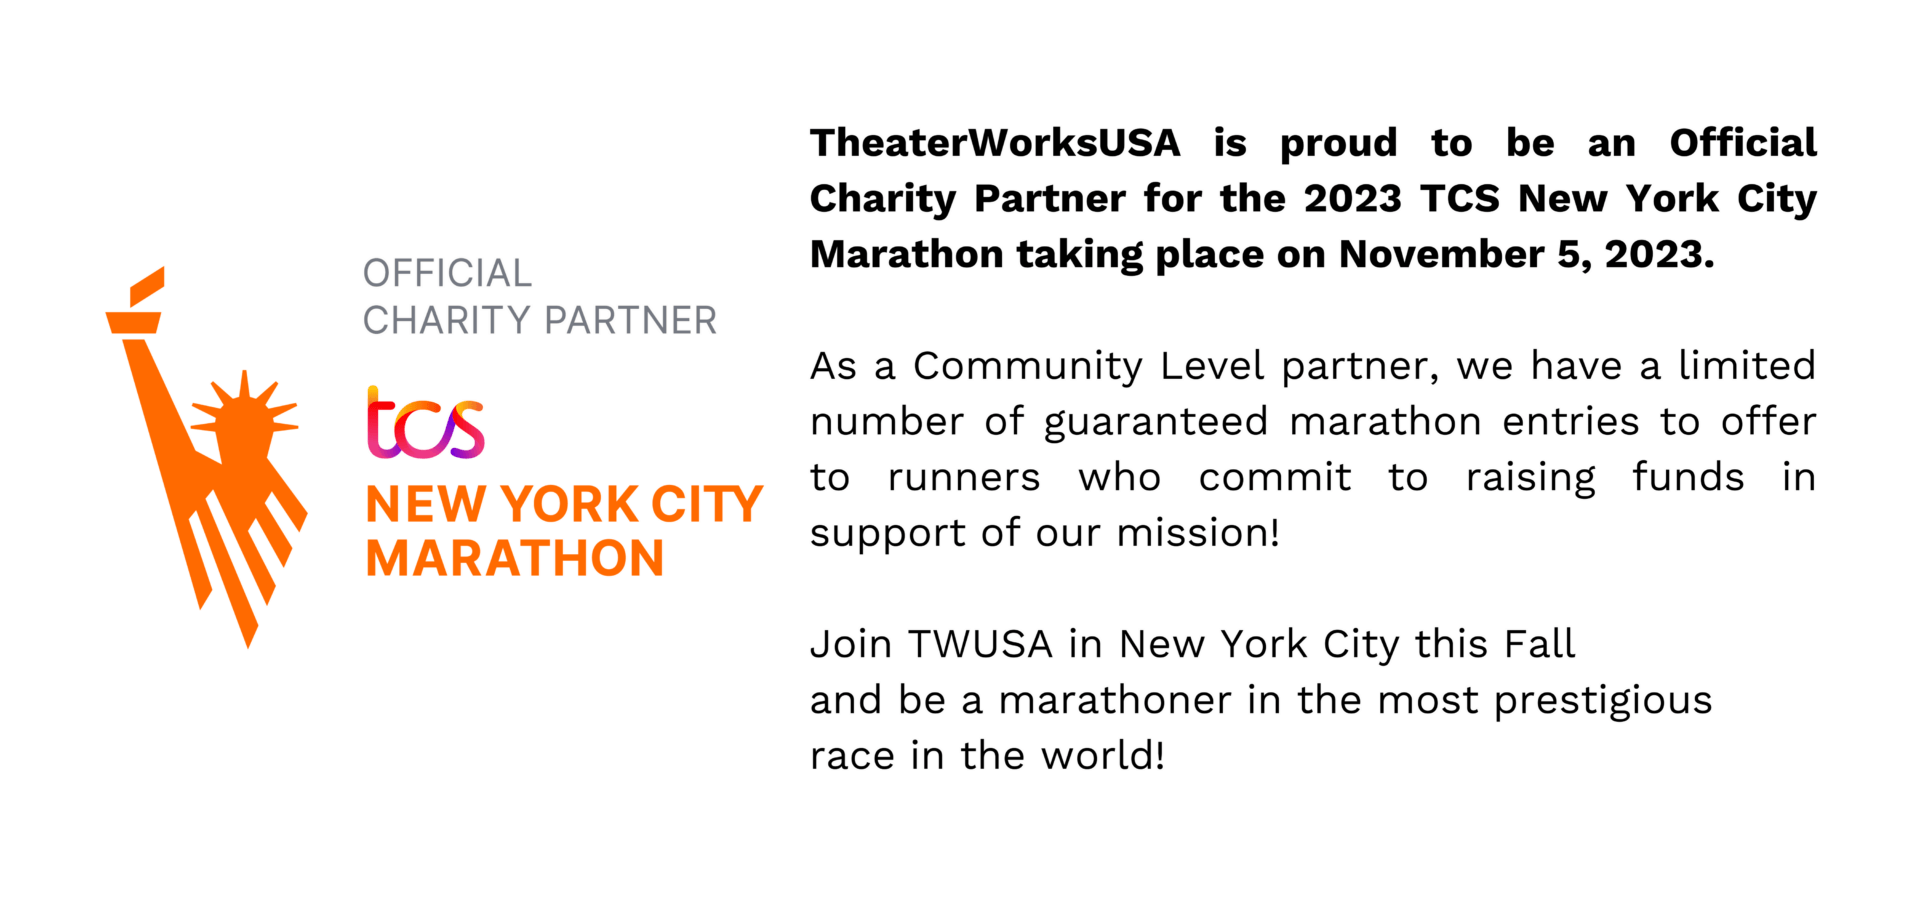 TheaterWorksUSA is proud to be an Official Charity Partner for the 2023 TCS New York City Marathon taking place on November 5, 2023. As a Community Level partner, we have a limited number of guaranteed marathon entries to offer to runners who commit to raising funds in support of our mission! Join TWUSA in New York City this Fall and be a marathoner in the most prestigious race in the world!